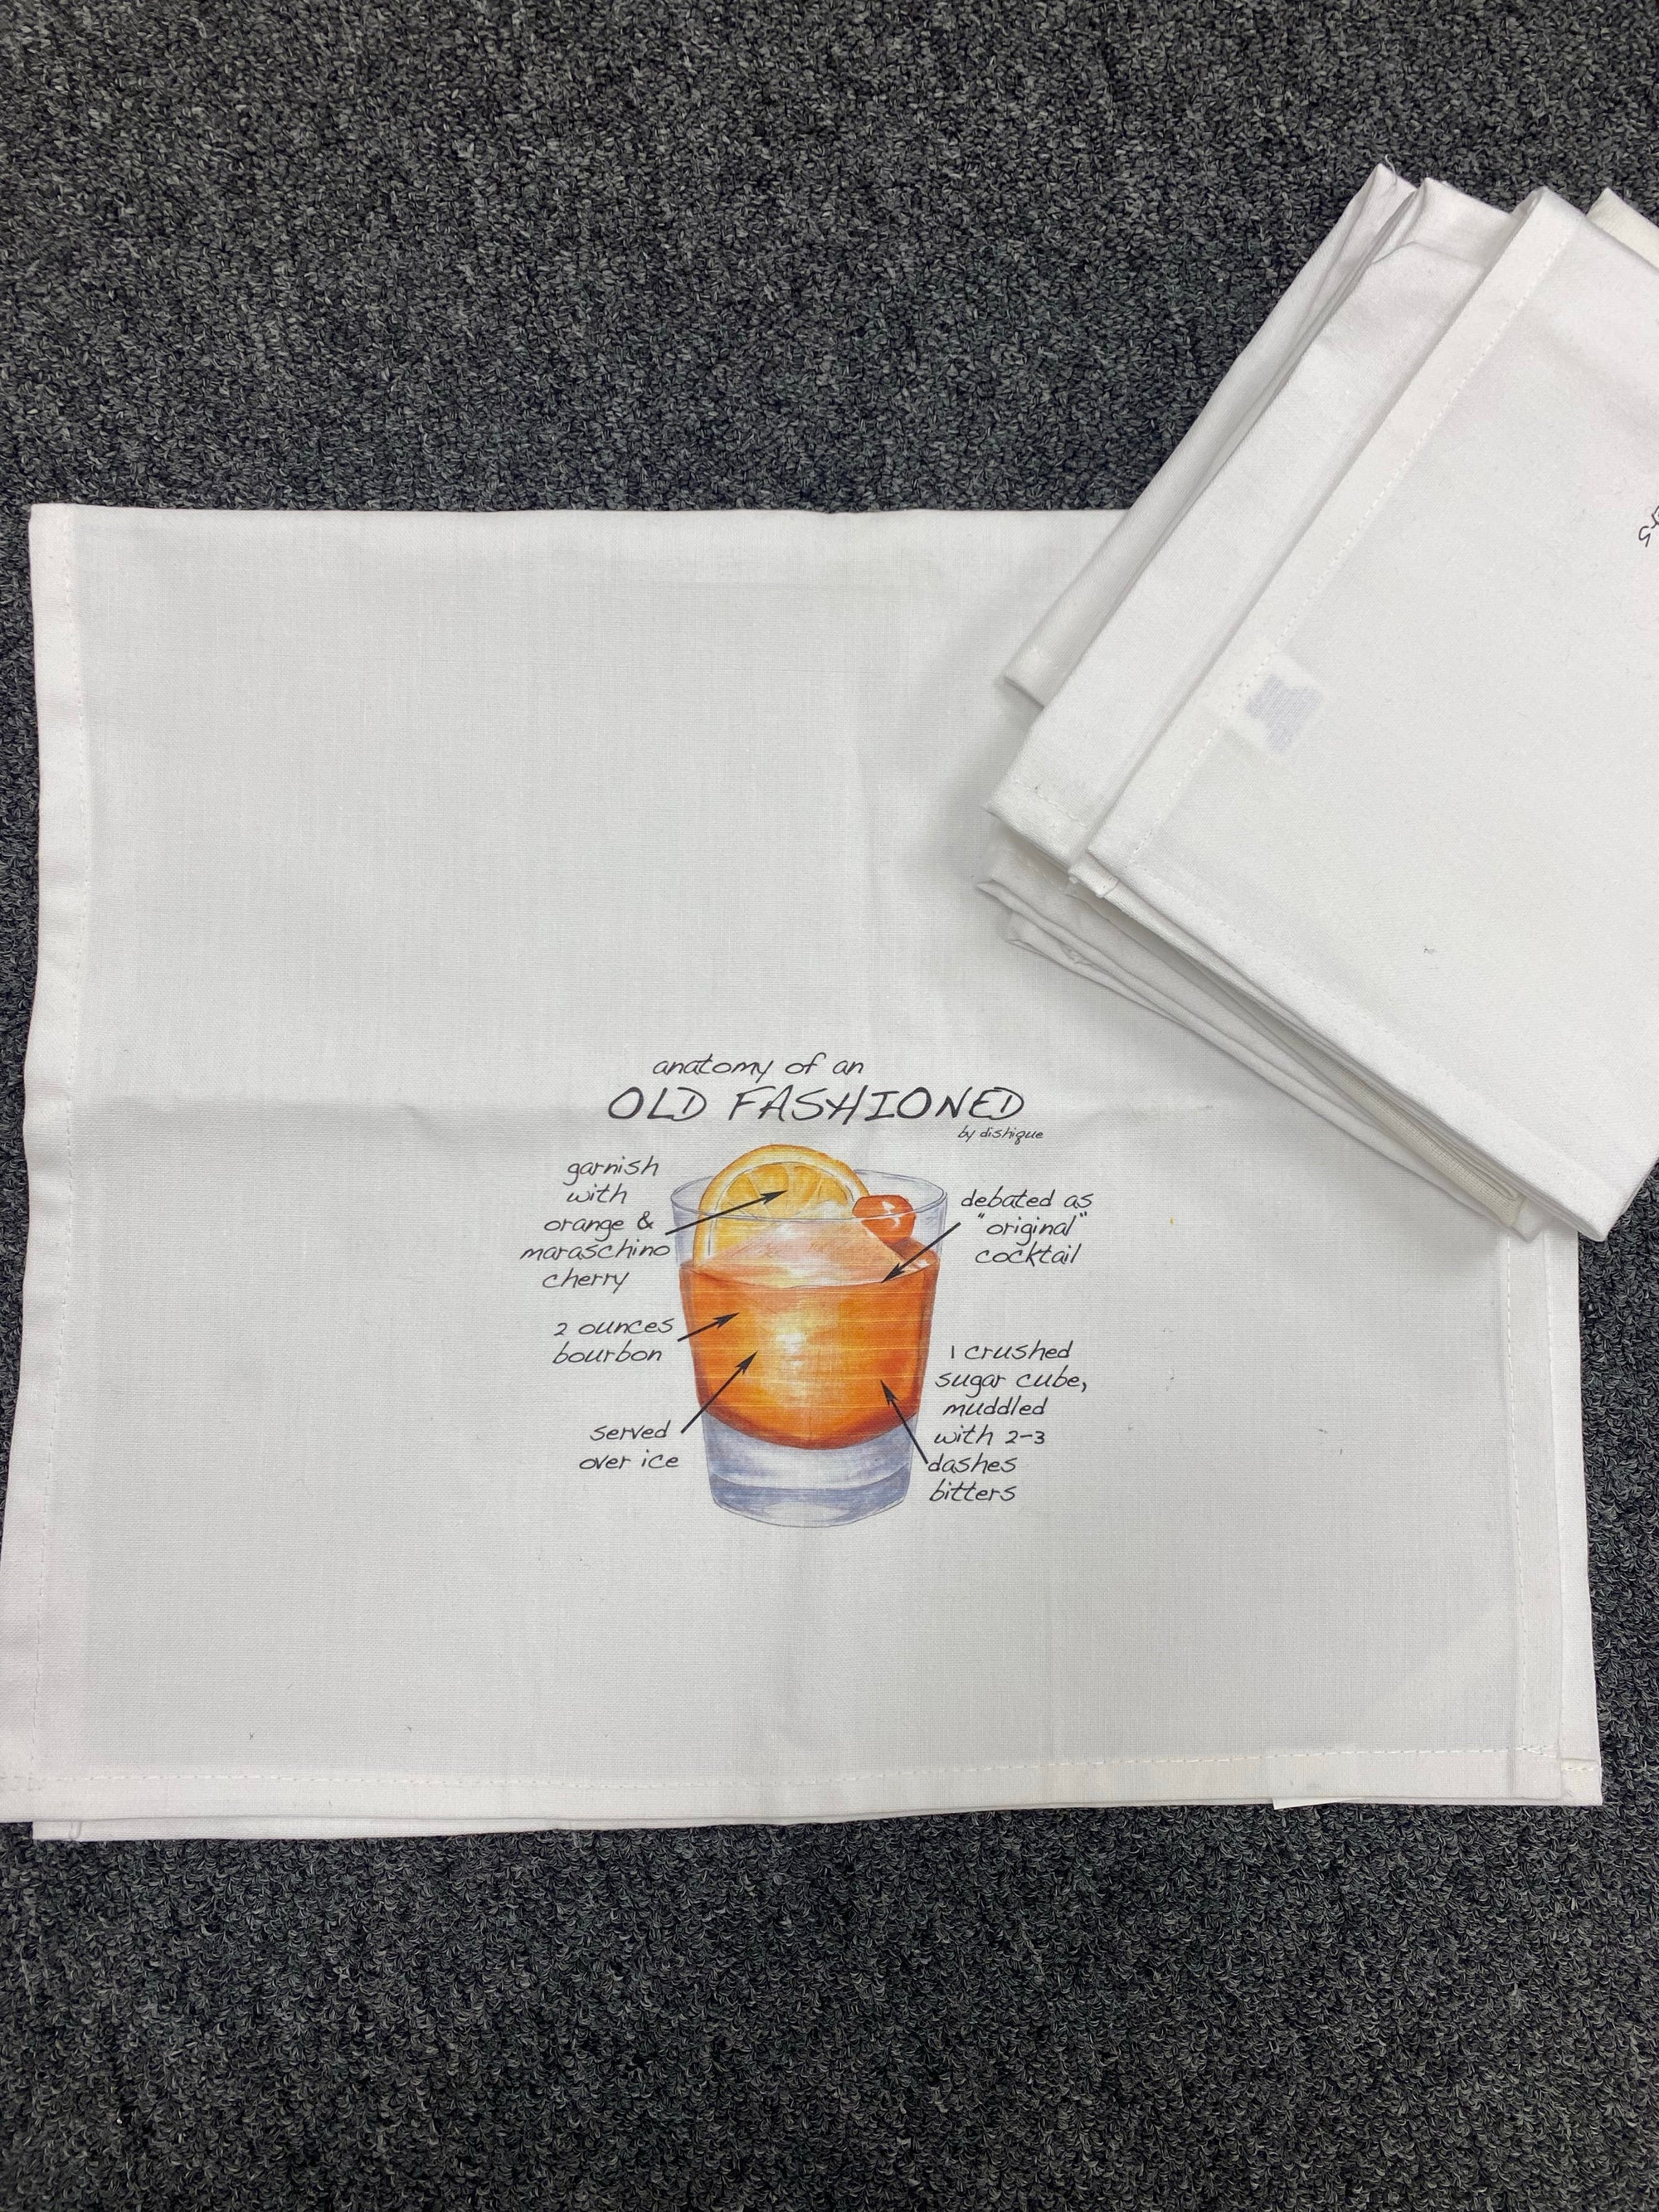 Slightly flawed towel bundle -  Anatomy of an Old Fashioned, 5 towels